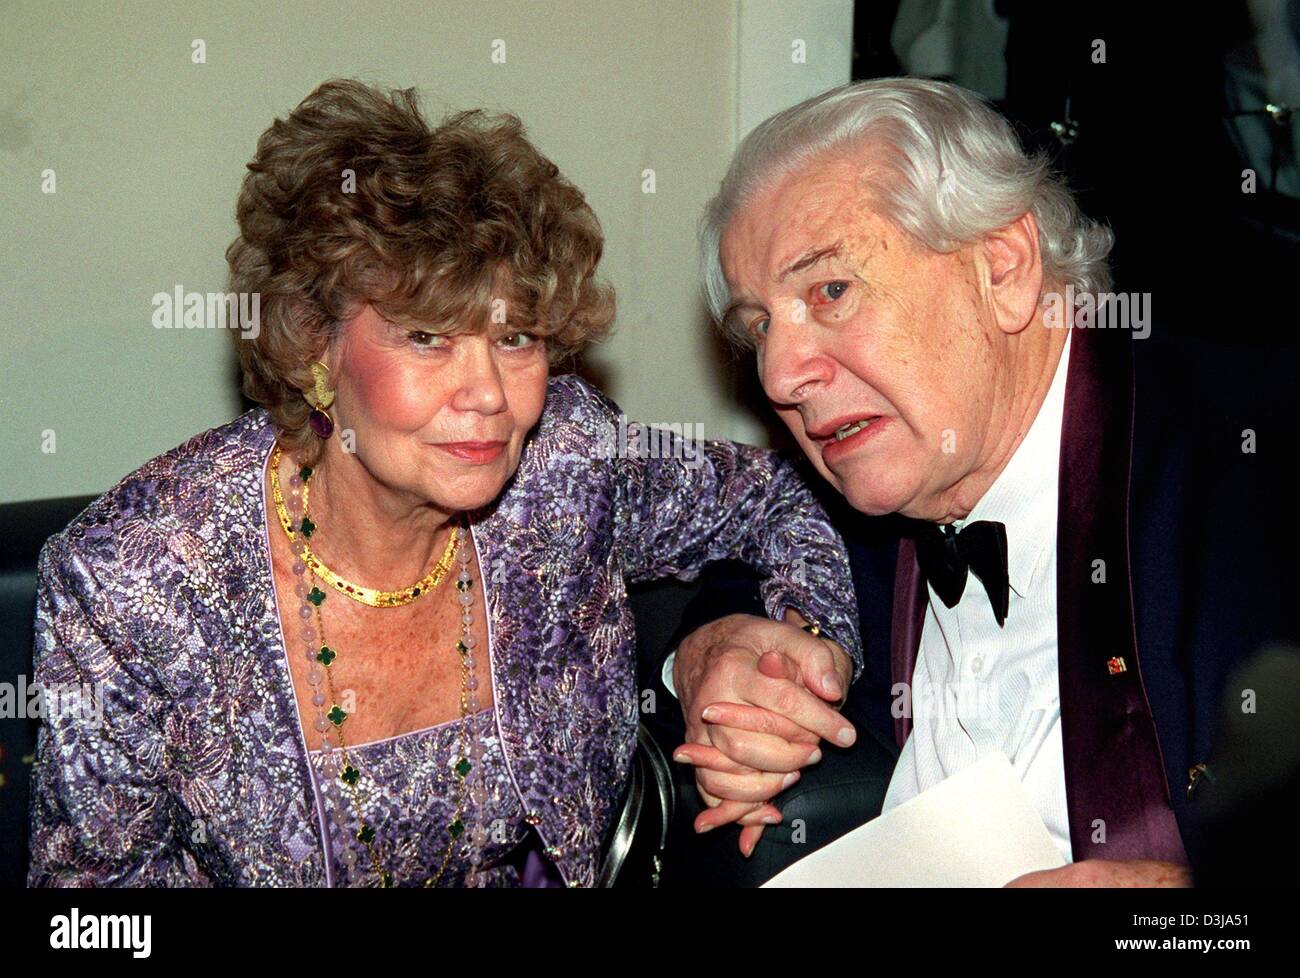 (dpa files) - British actor Peter Ustinov (R) and his third wife Helene sit next to each other during his 80th birthday reception at the 'Theater des Westens' (theatre of the west) in Berlin, 6 April 2001. Ustinov died at the age of 82 in a hopsital in Geneva on 29 March 2004. He won two Oscars for his parts in 'Spartacus' (1959) and in 'Topkapi' (1964). Ustinov also wrote screenpl Stock Photo